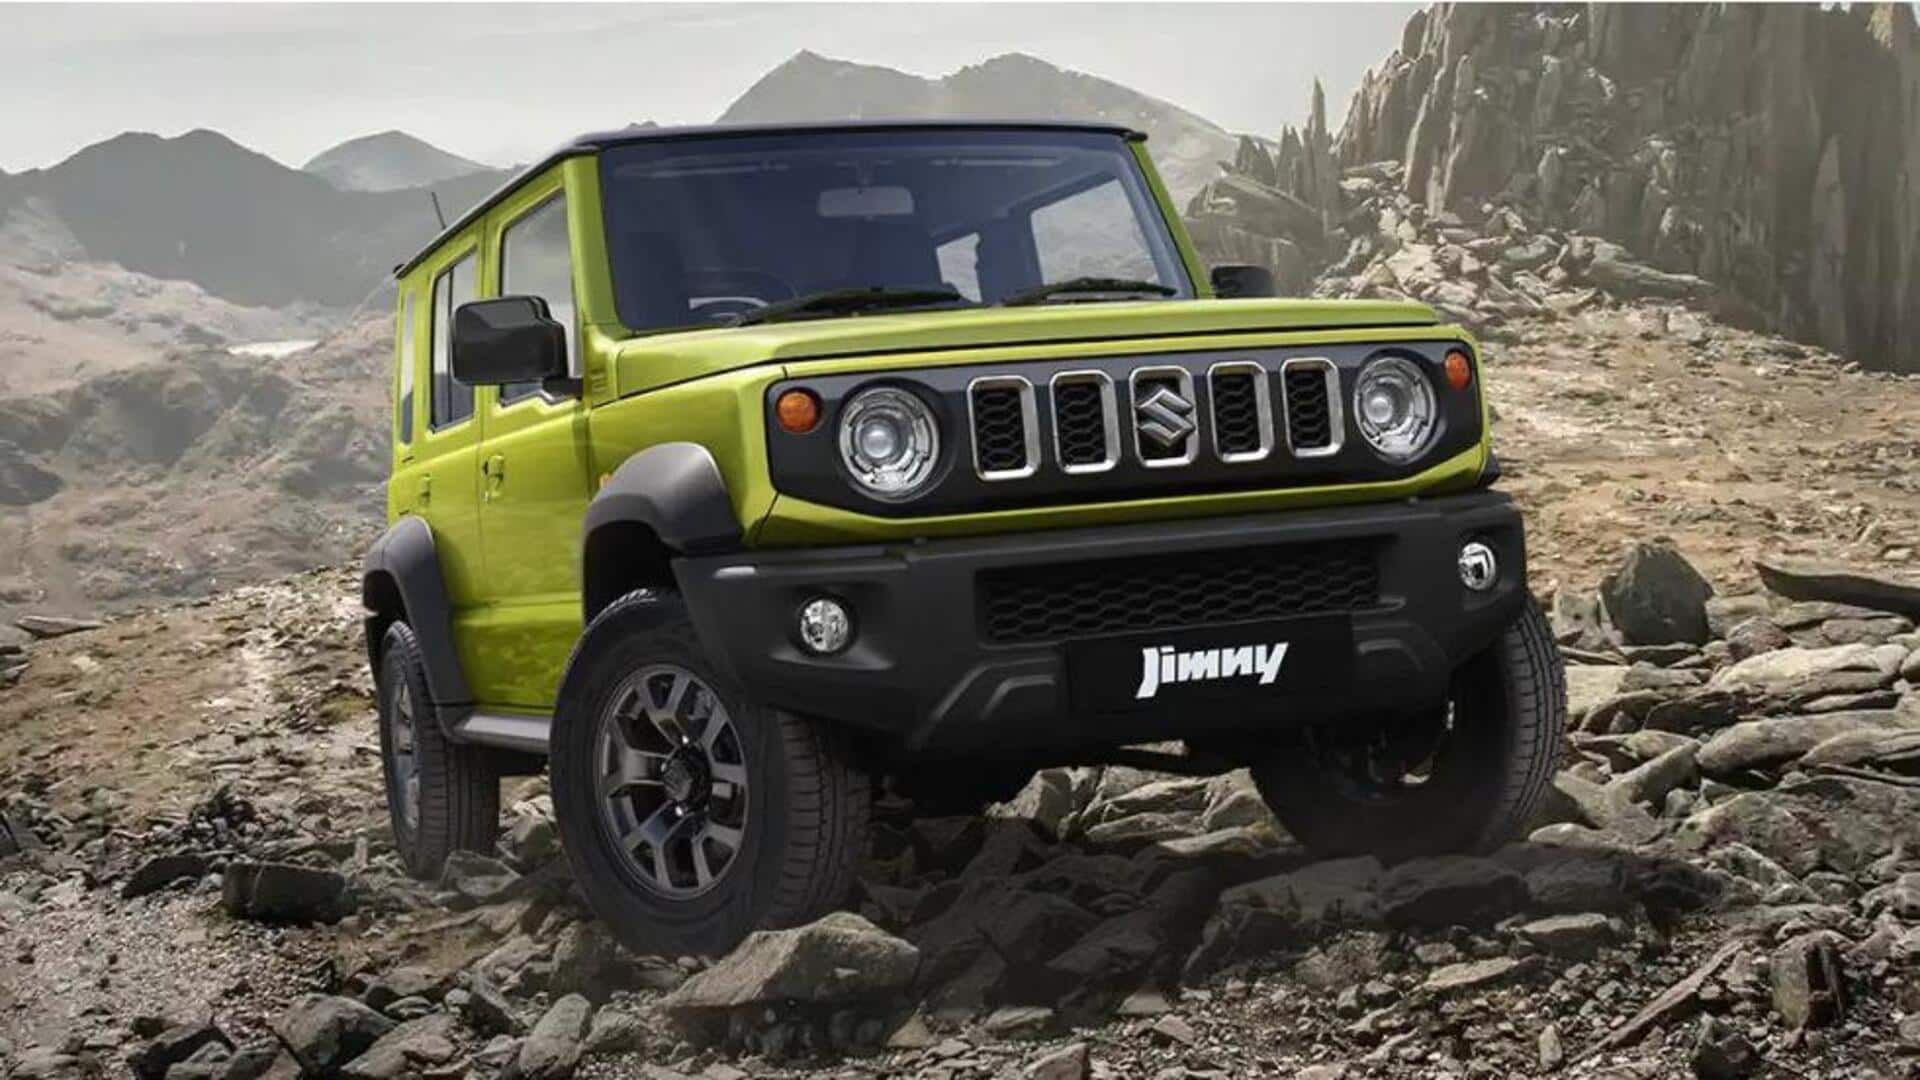 Maruti Suzuki Jimny available with Rs. 1.5L off this March